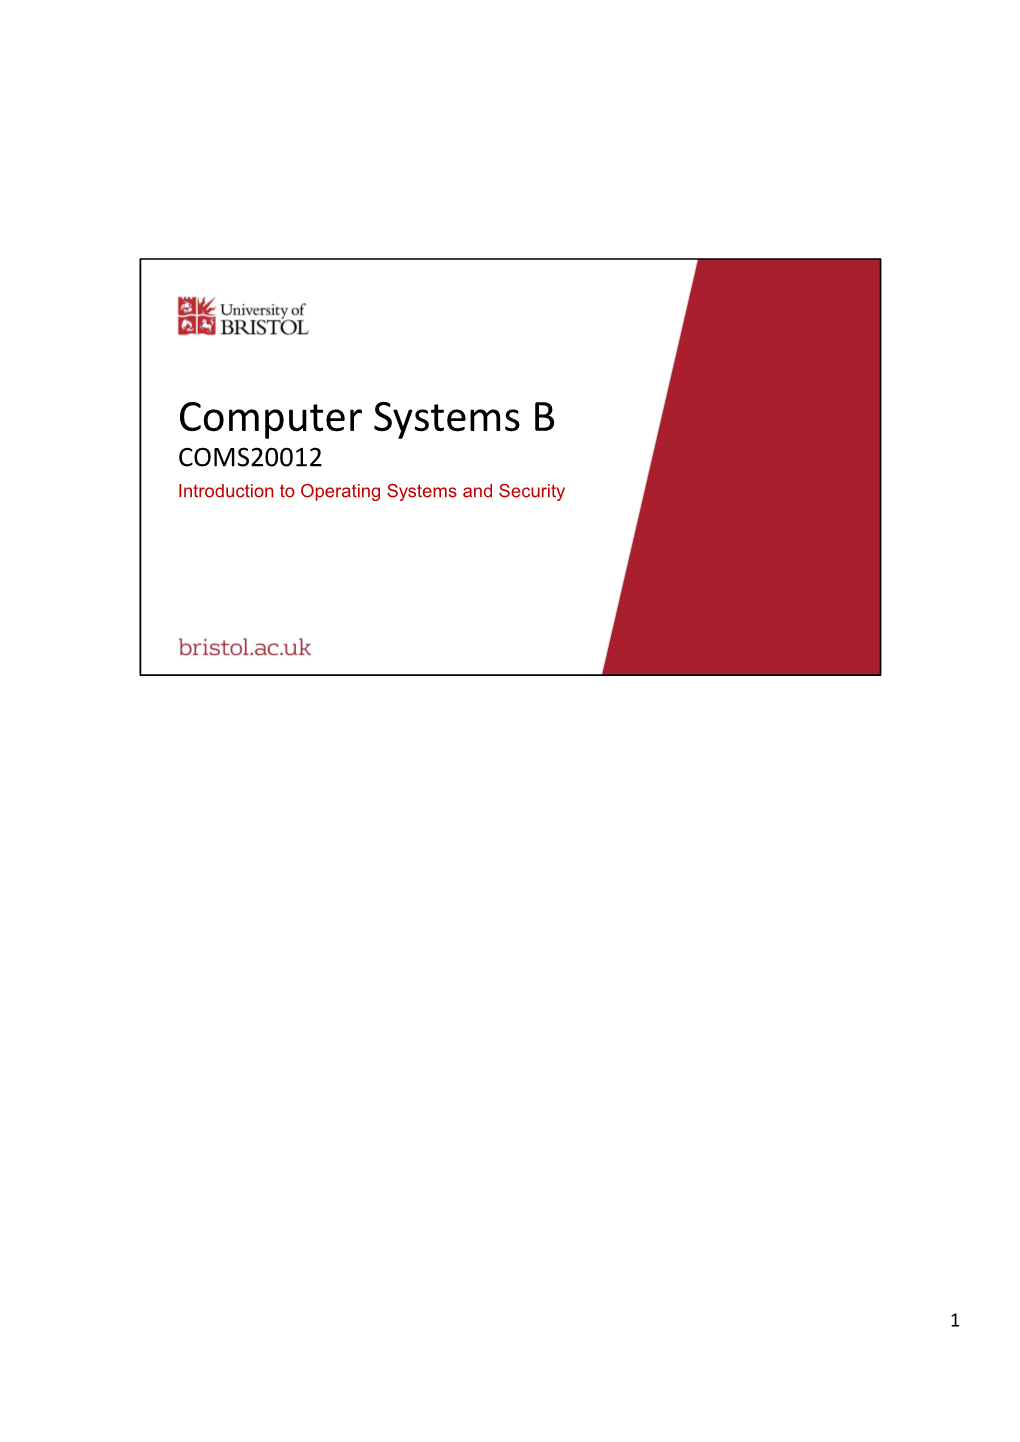 Computer Systems B COMS20012 Introduction to Operating Systems and Security